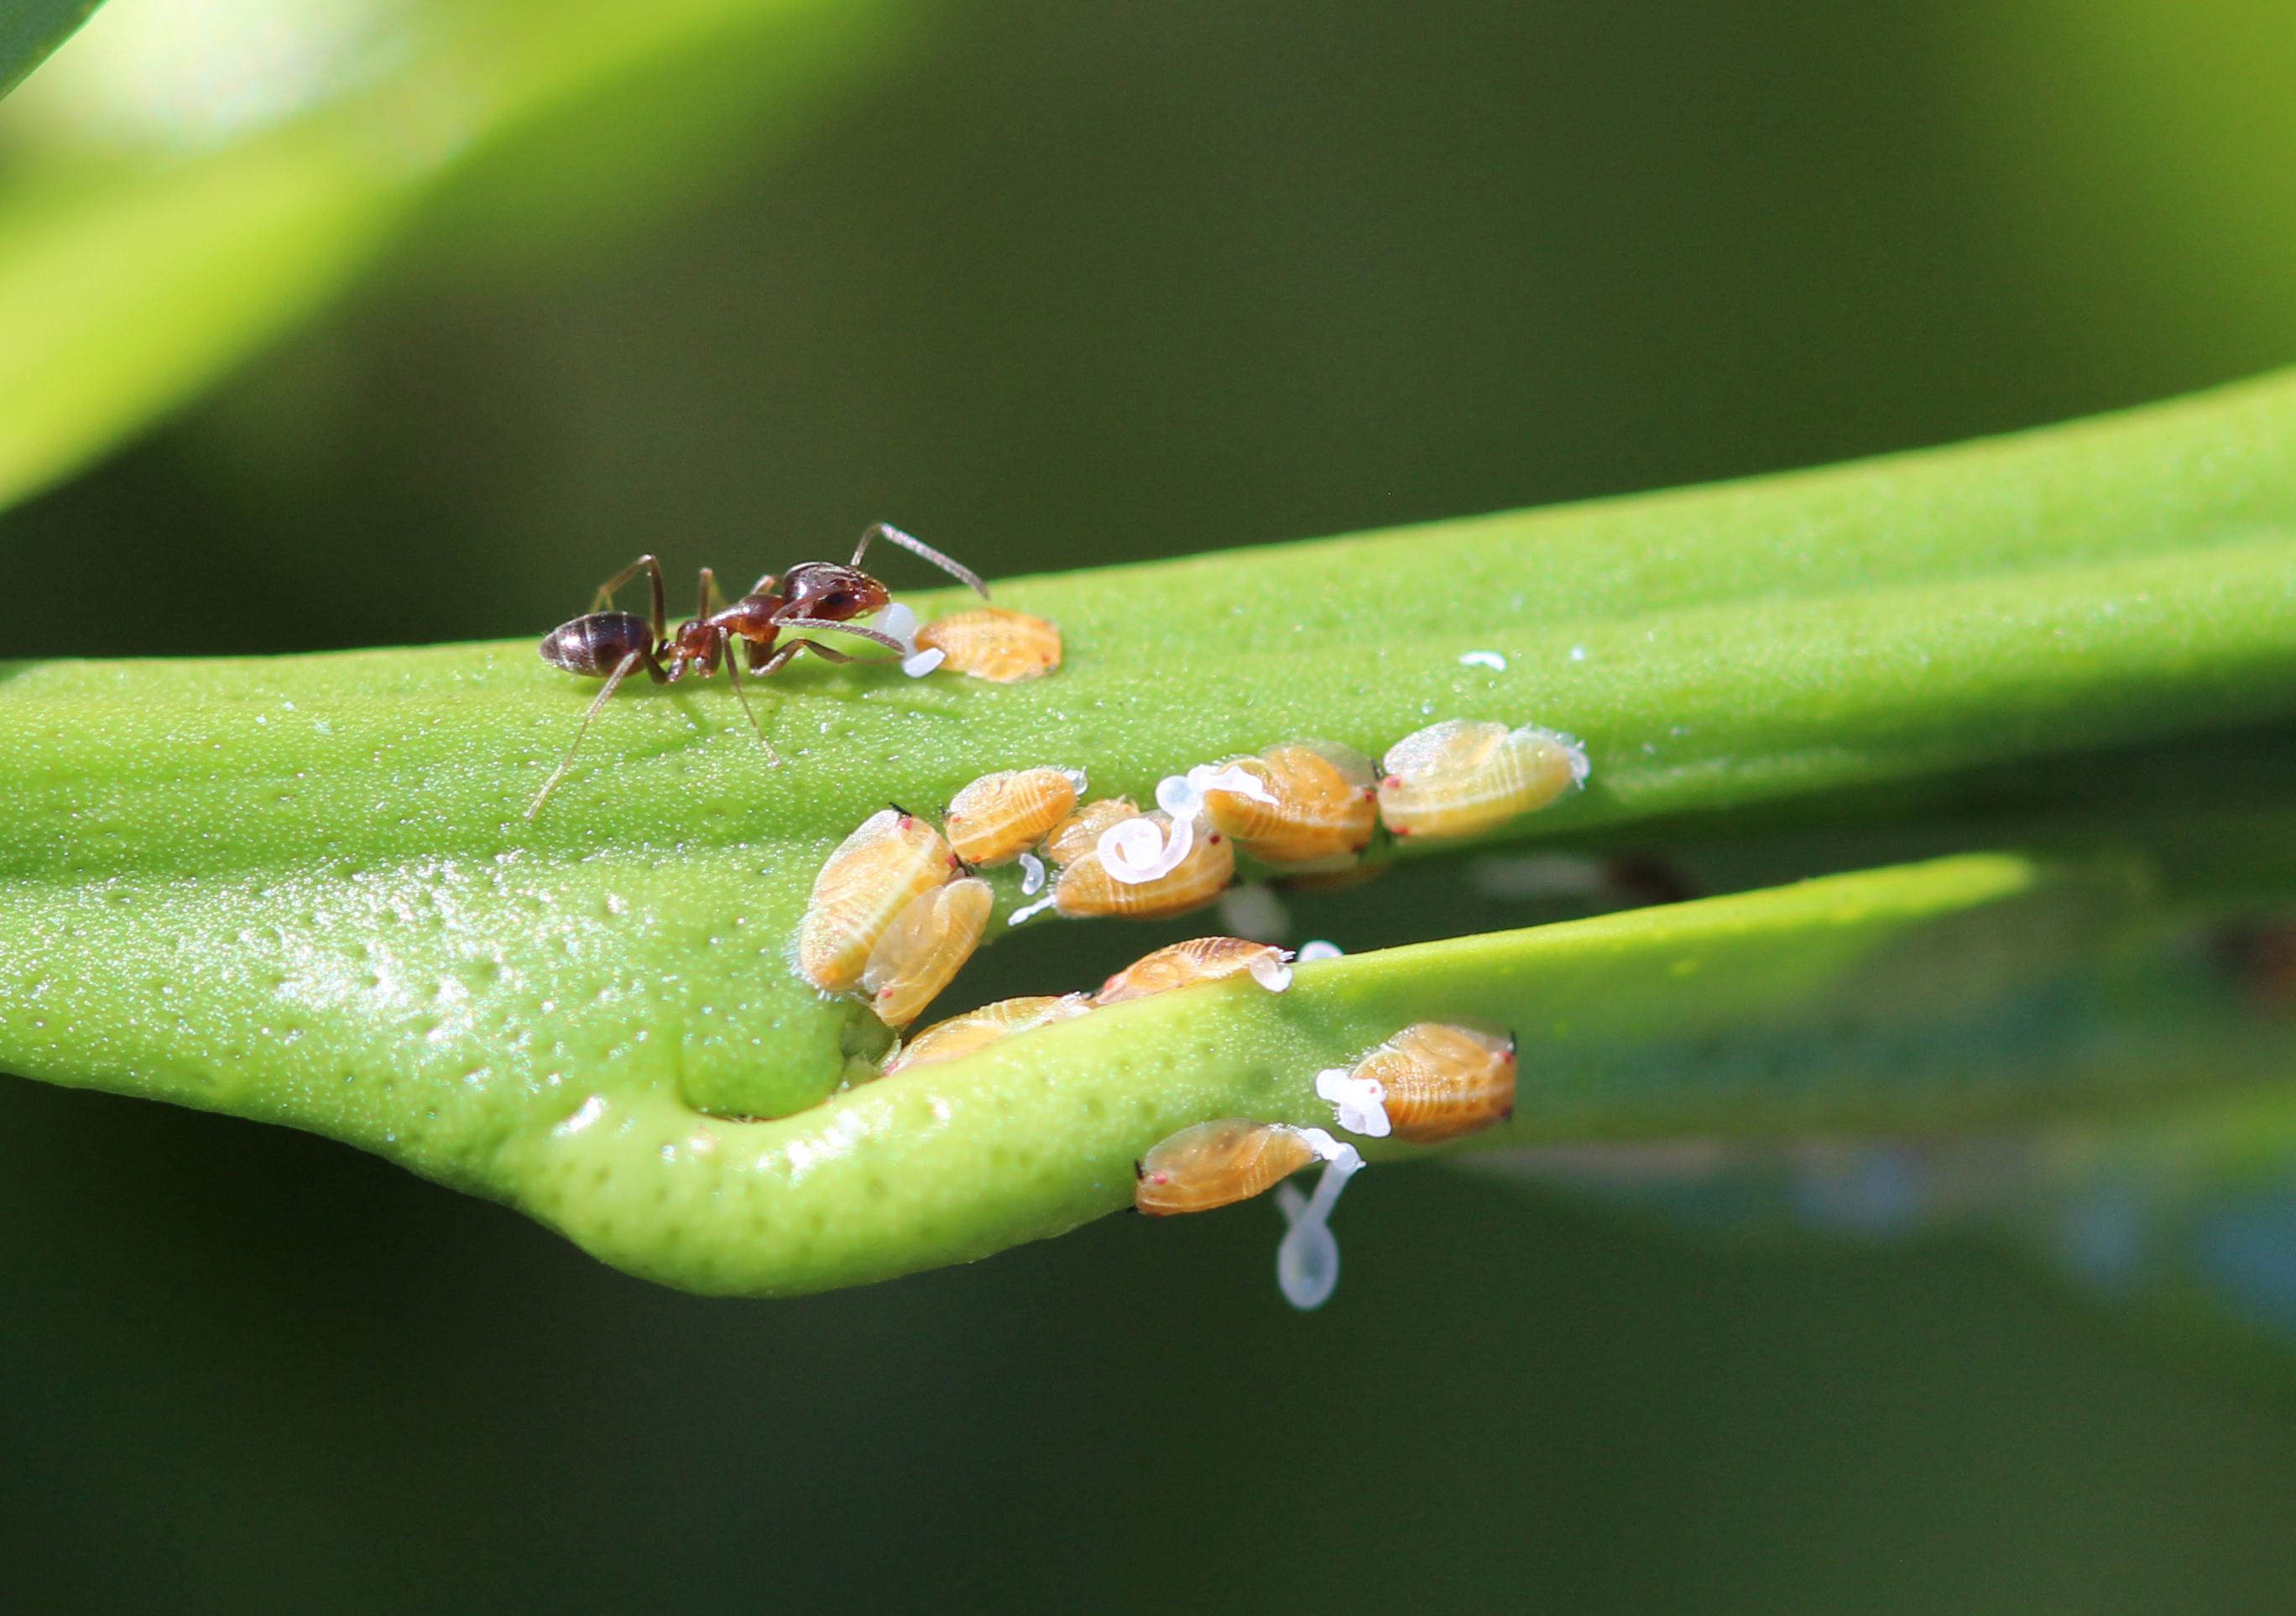 Argentine ant feeding on honeydew produced by the nymph